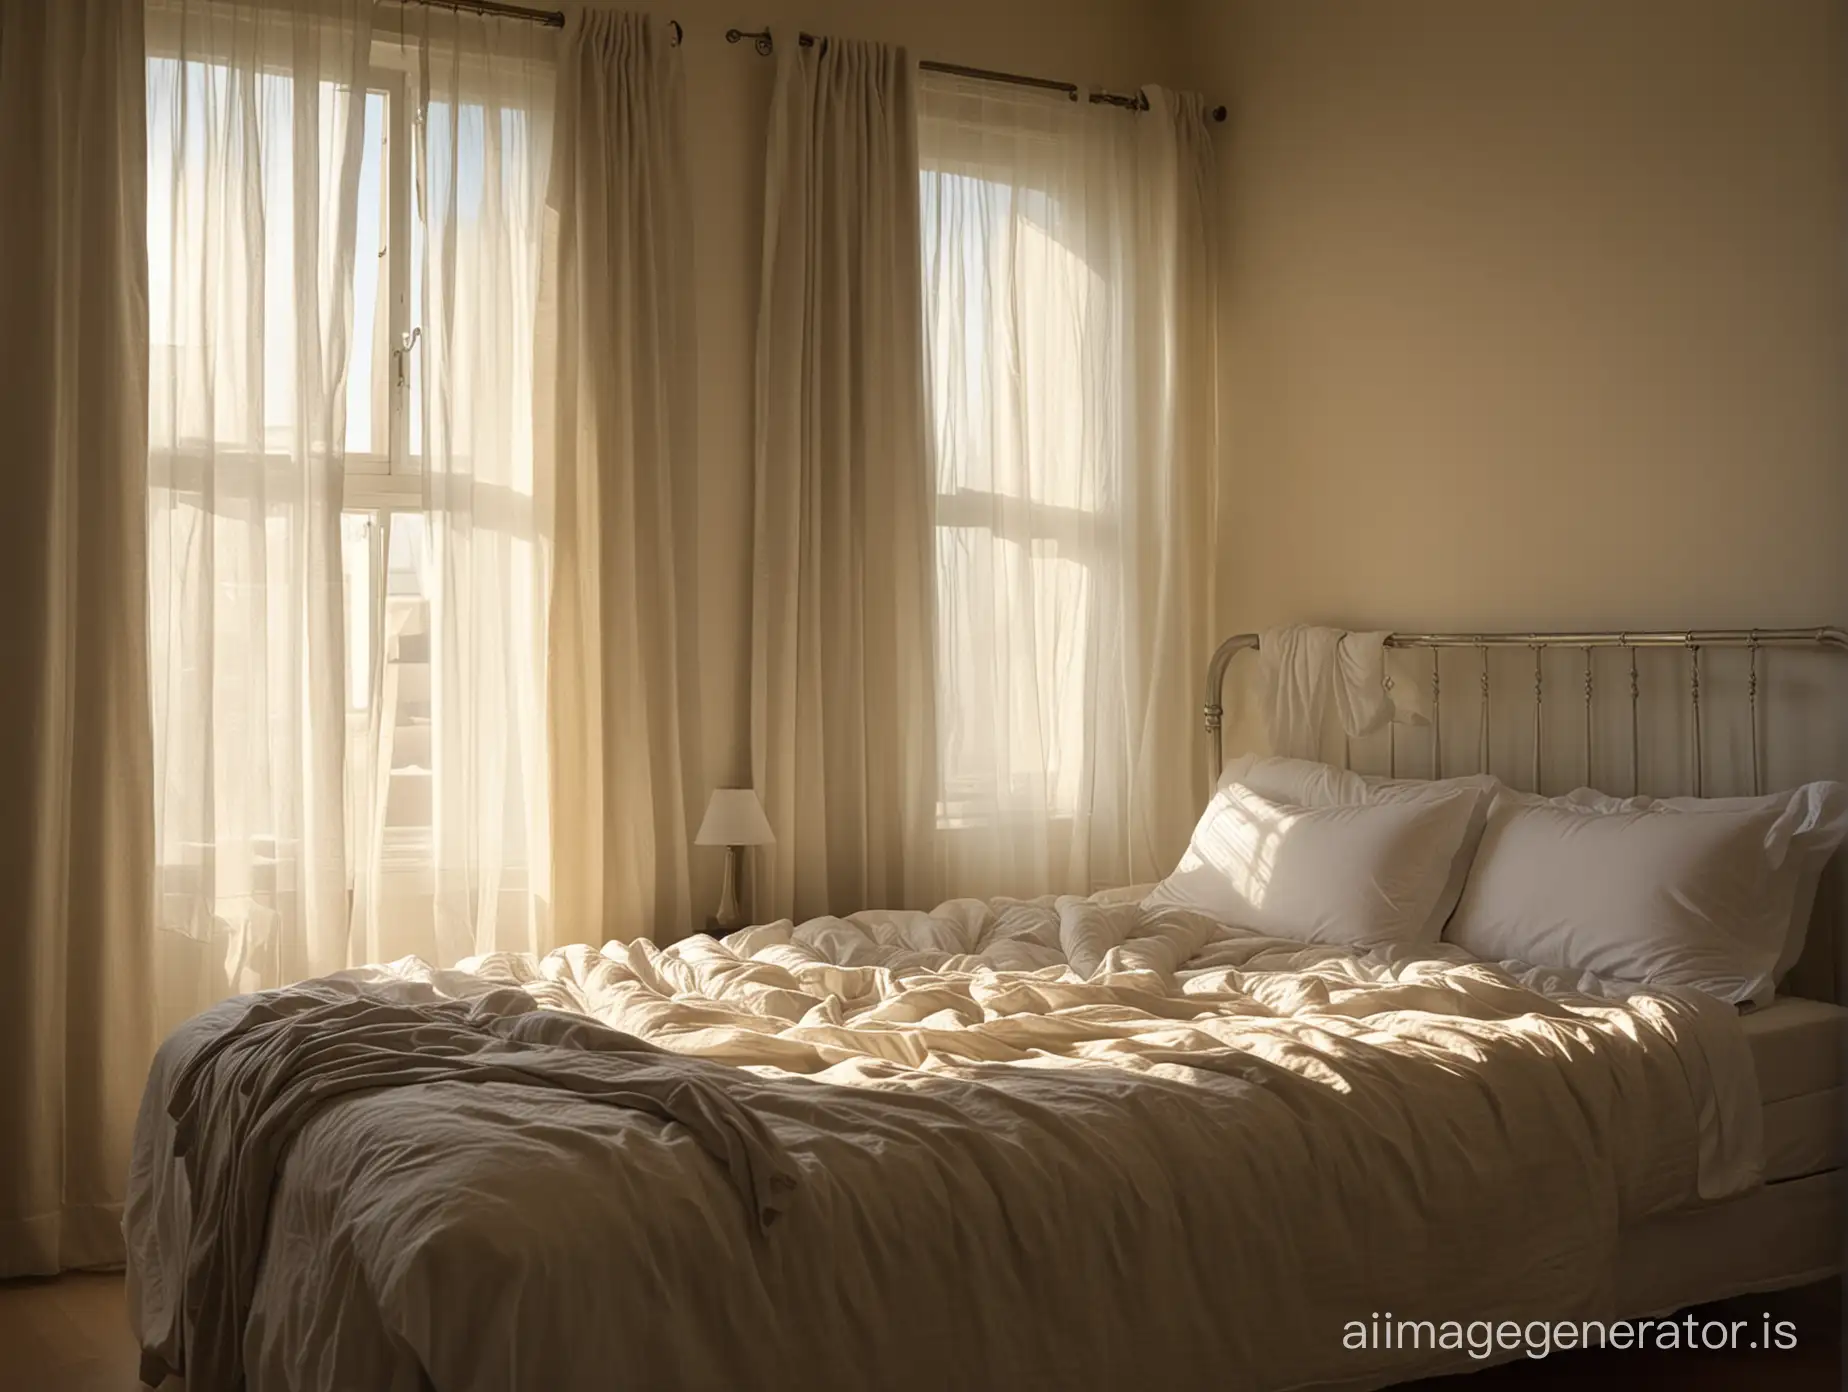 A cozy bedroom filled with morning sunlight streaming through sheer curtains. The bed, neatly made with soft pillows, occupies the center of the room. John, with a disheveled appearance, sits up on the right side of the bed, facing the empty space beside him. His expression is a mix of confusion and concern as he gazes at the vacant spot where his wife usually sleeps.